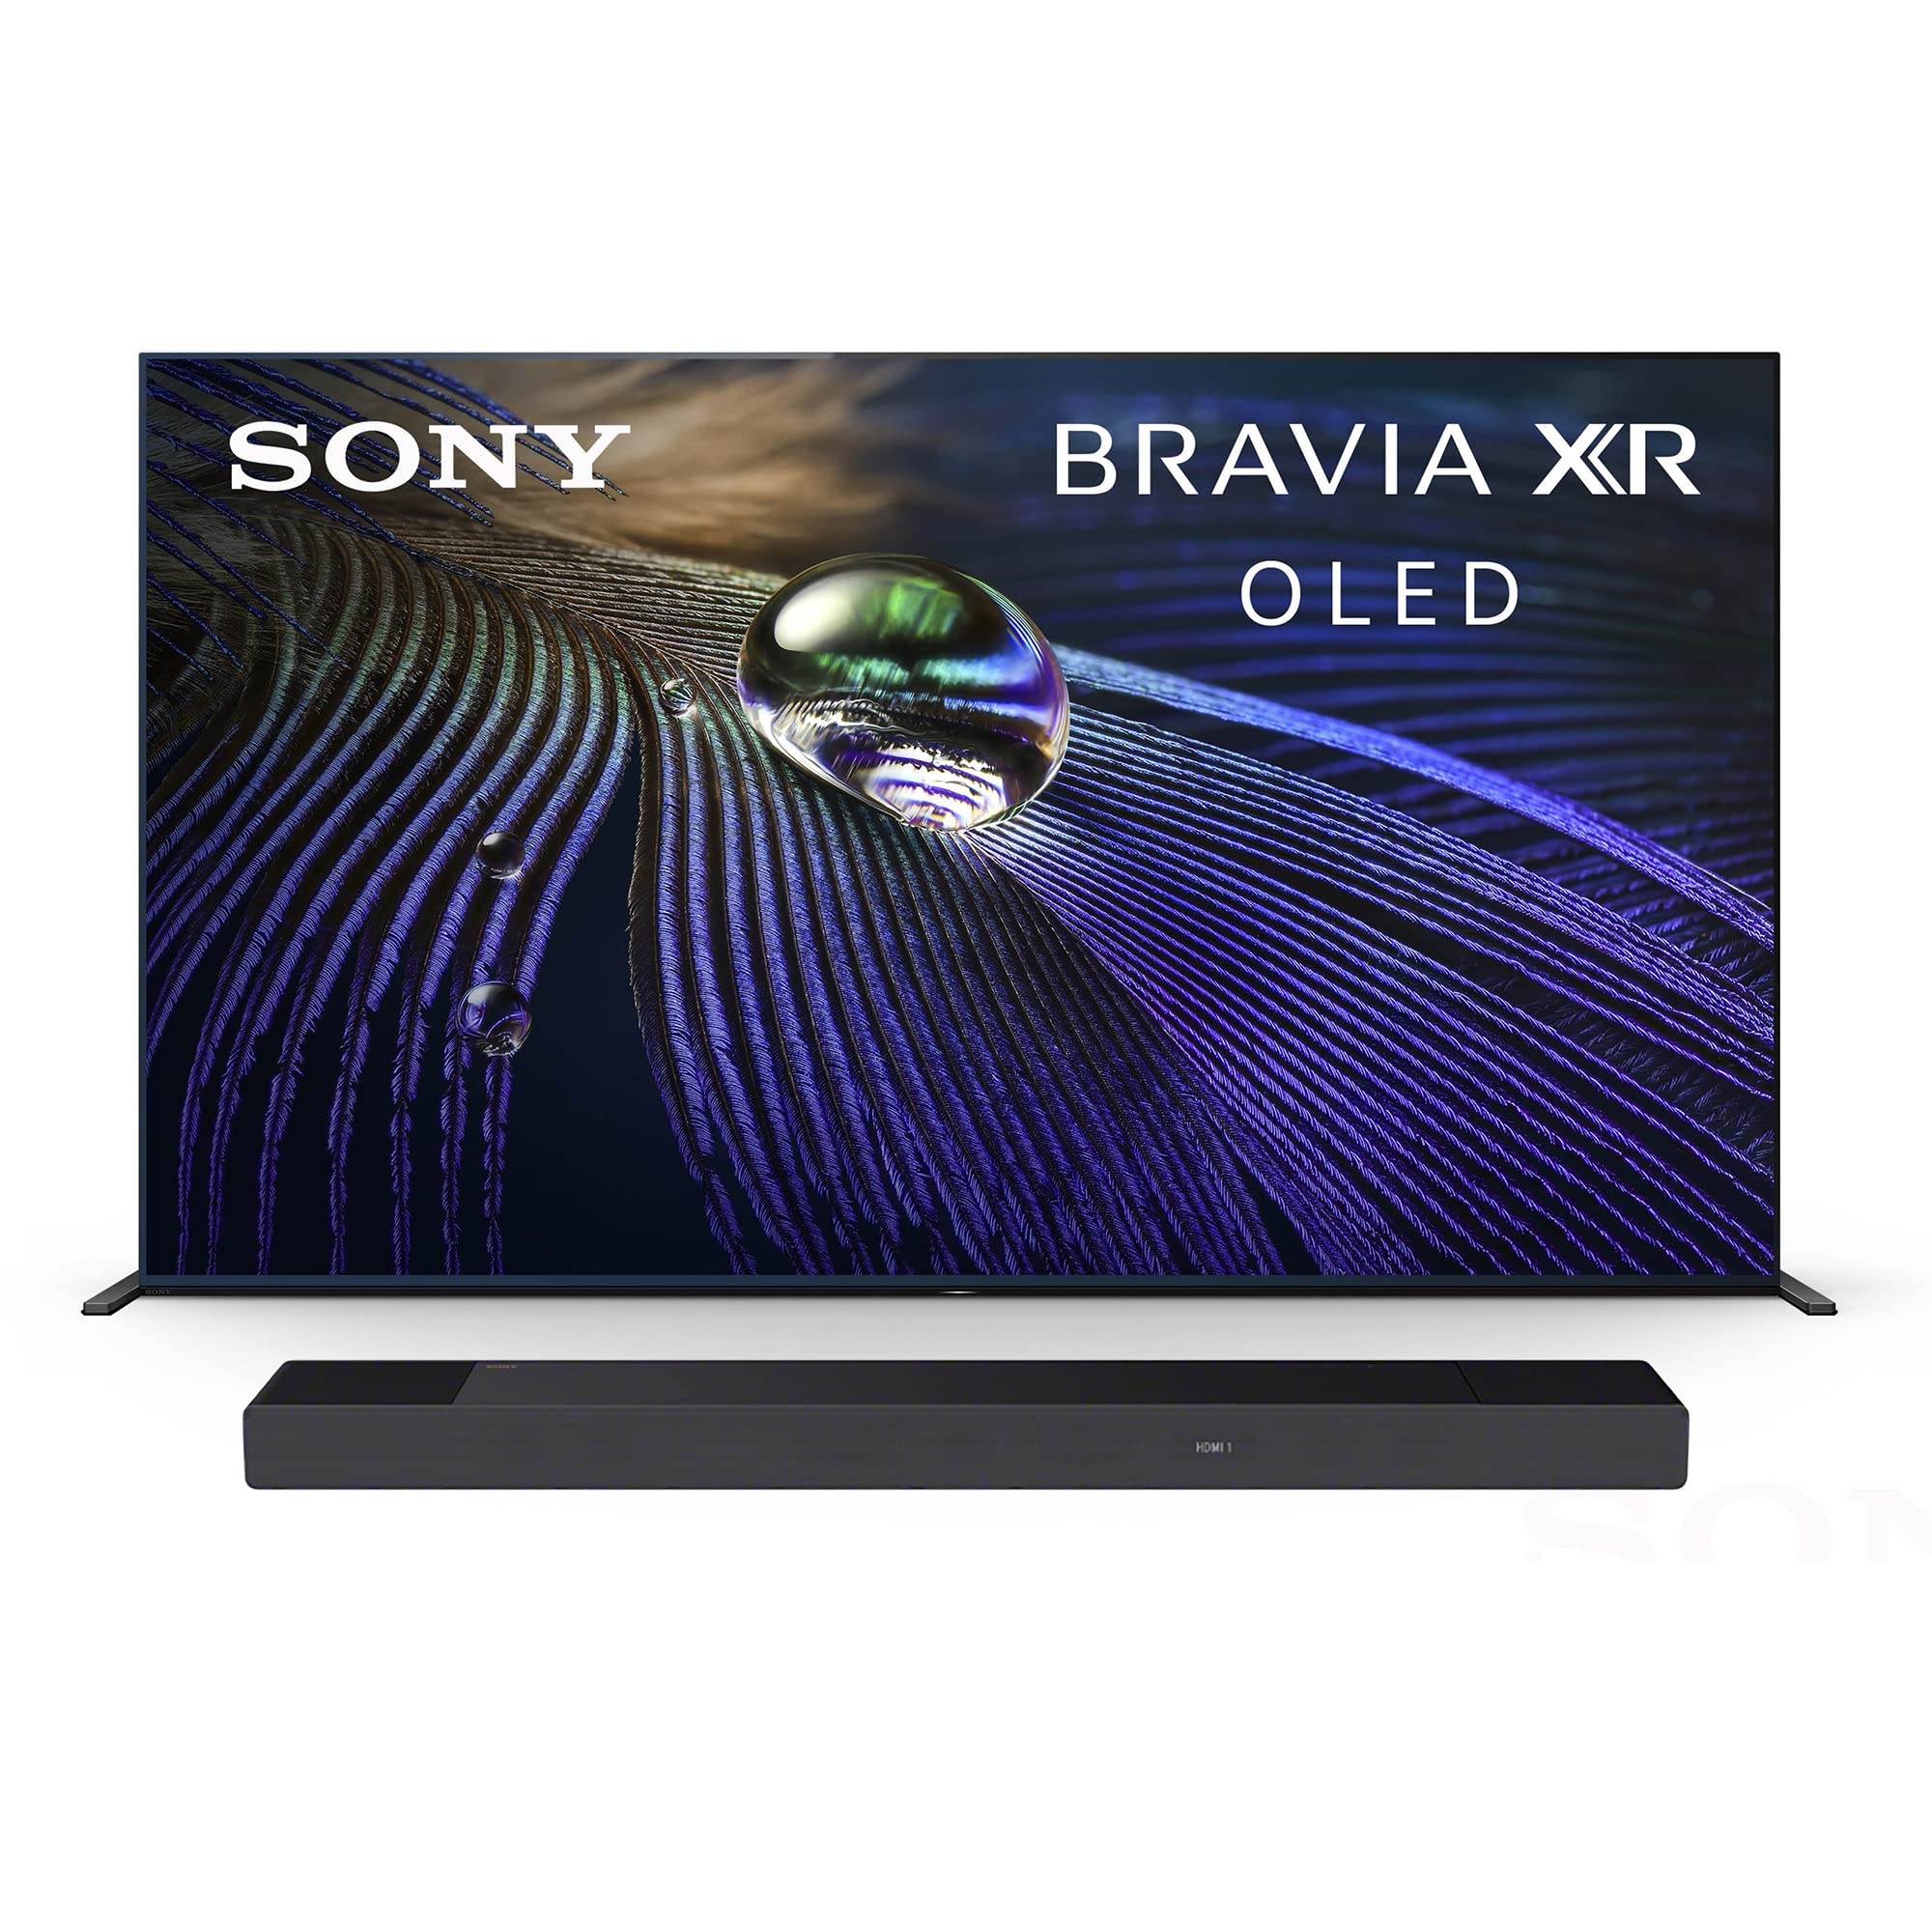 Sony HT-A7000 7.1.2ch X and 360 Reality Audio, Compatible with Alexa and Google Assistant + Sony A90J 83 Inch TV: BRAVIA XR OLED 4K and Alexa Compatibility XR83A90J- 2021 Model